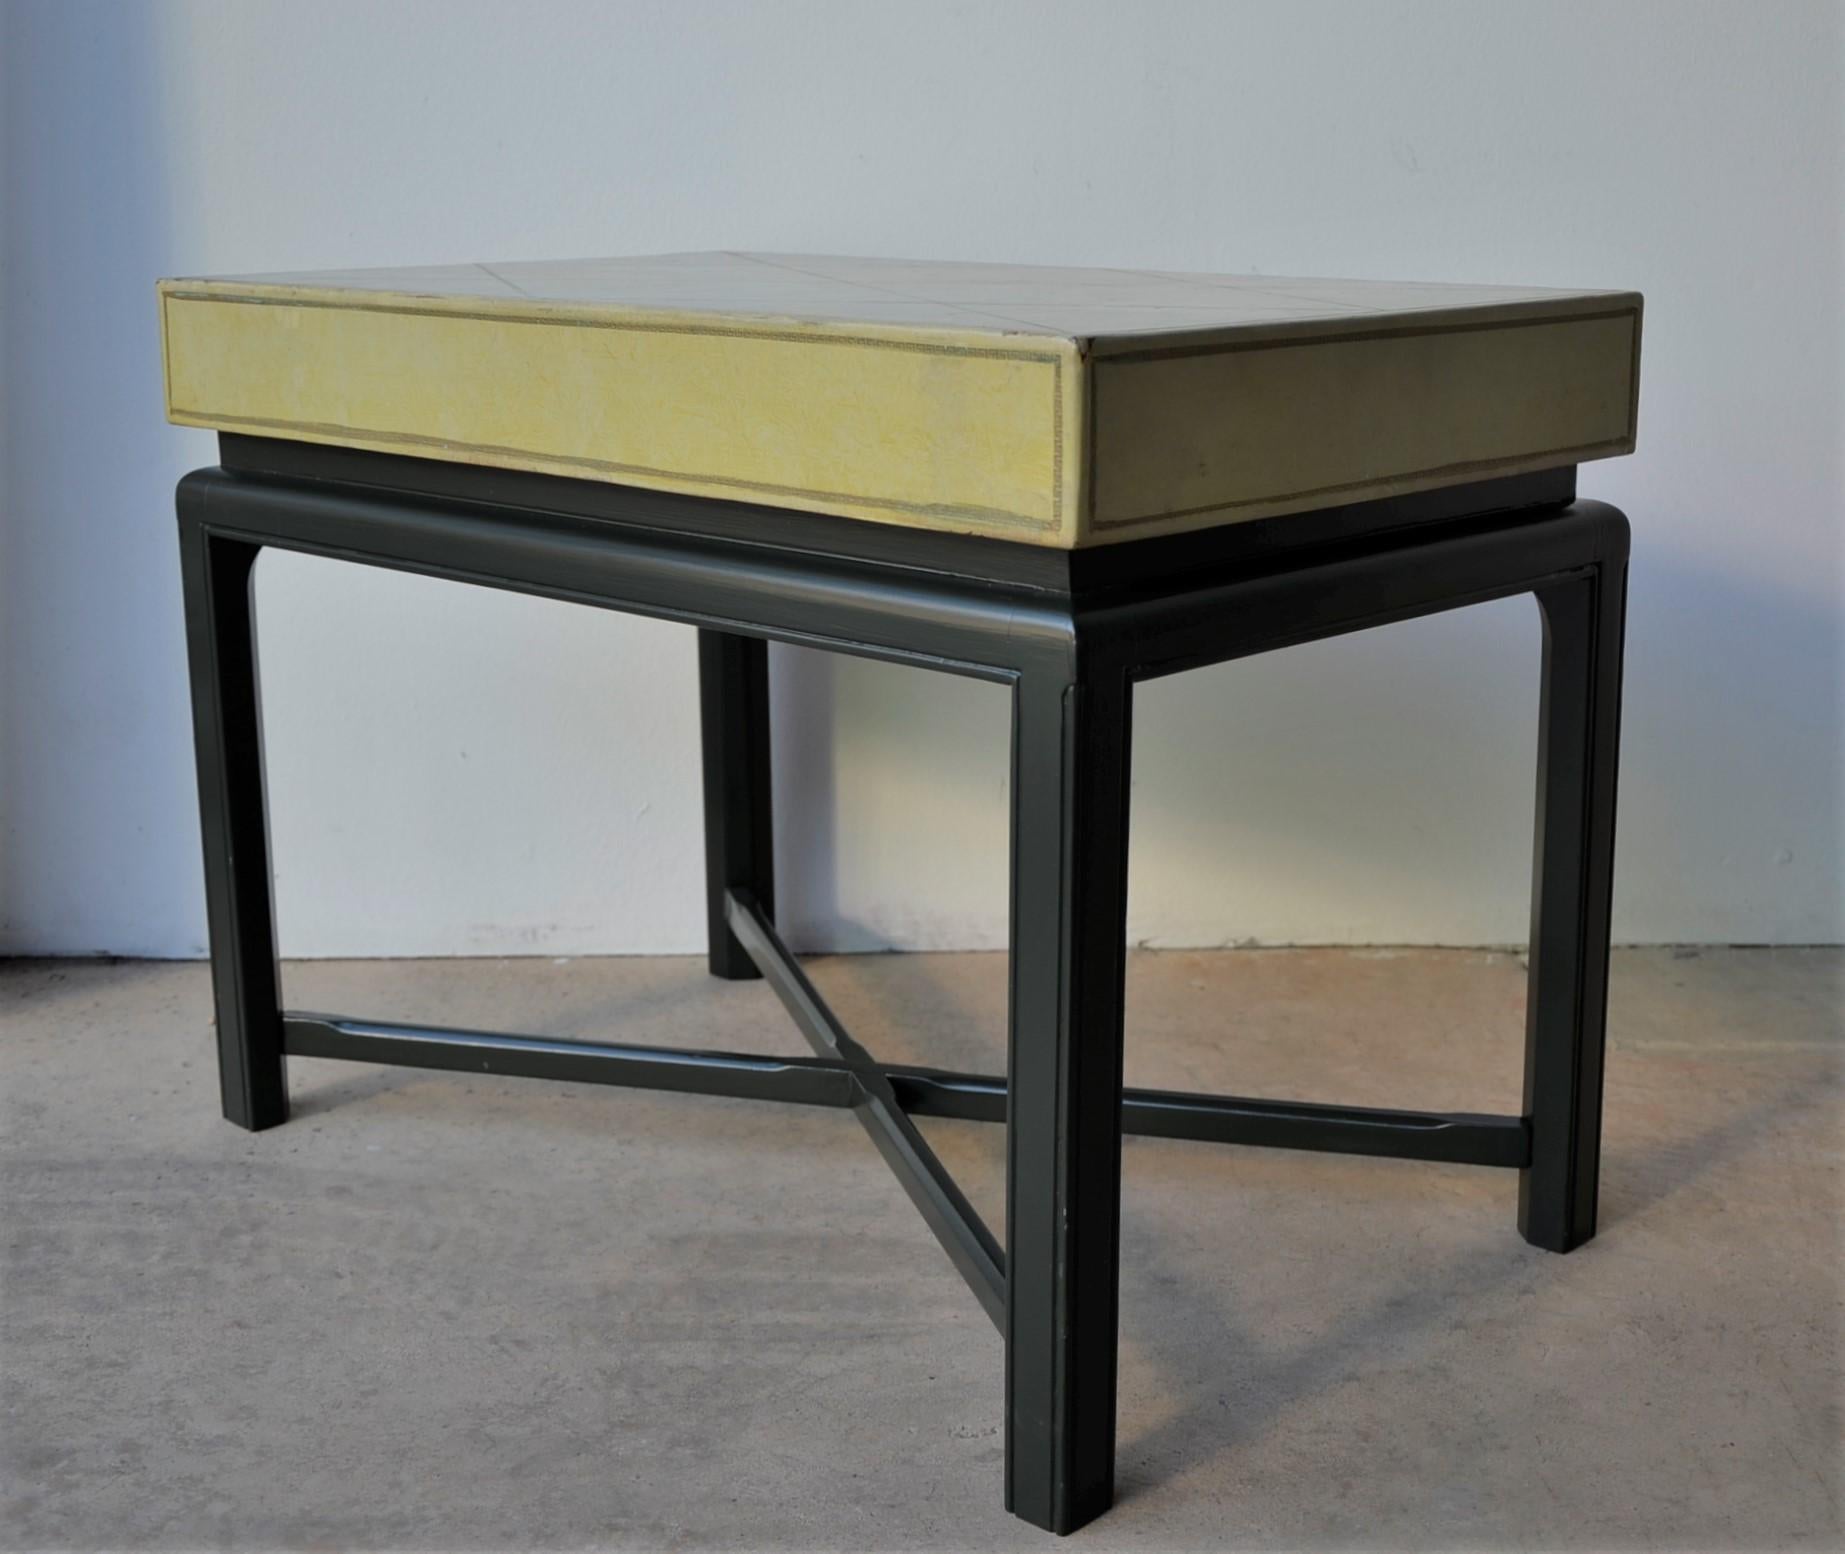 20th Century Parzinger Green with Gold Tooled Leather Top & Lacquered Green Frame Side Table